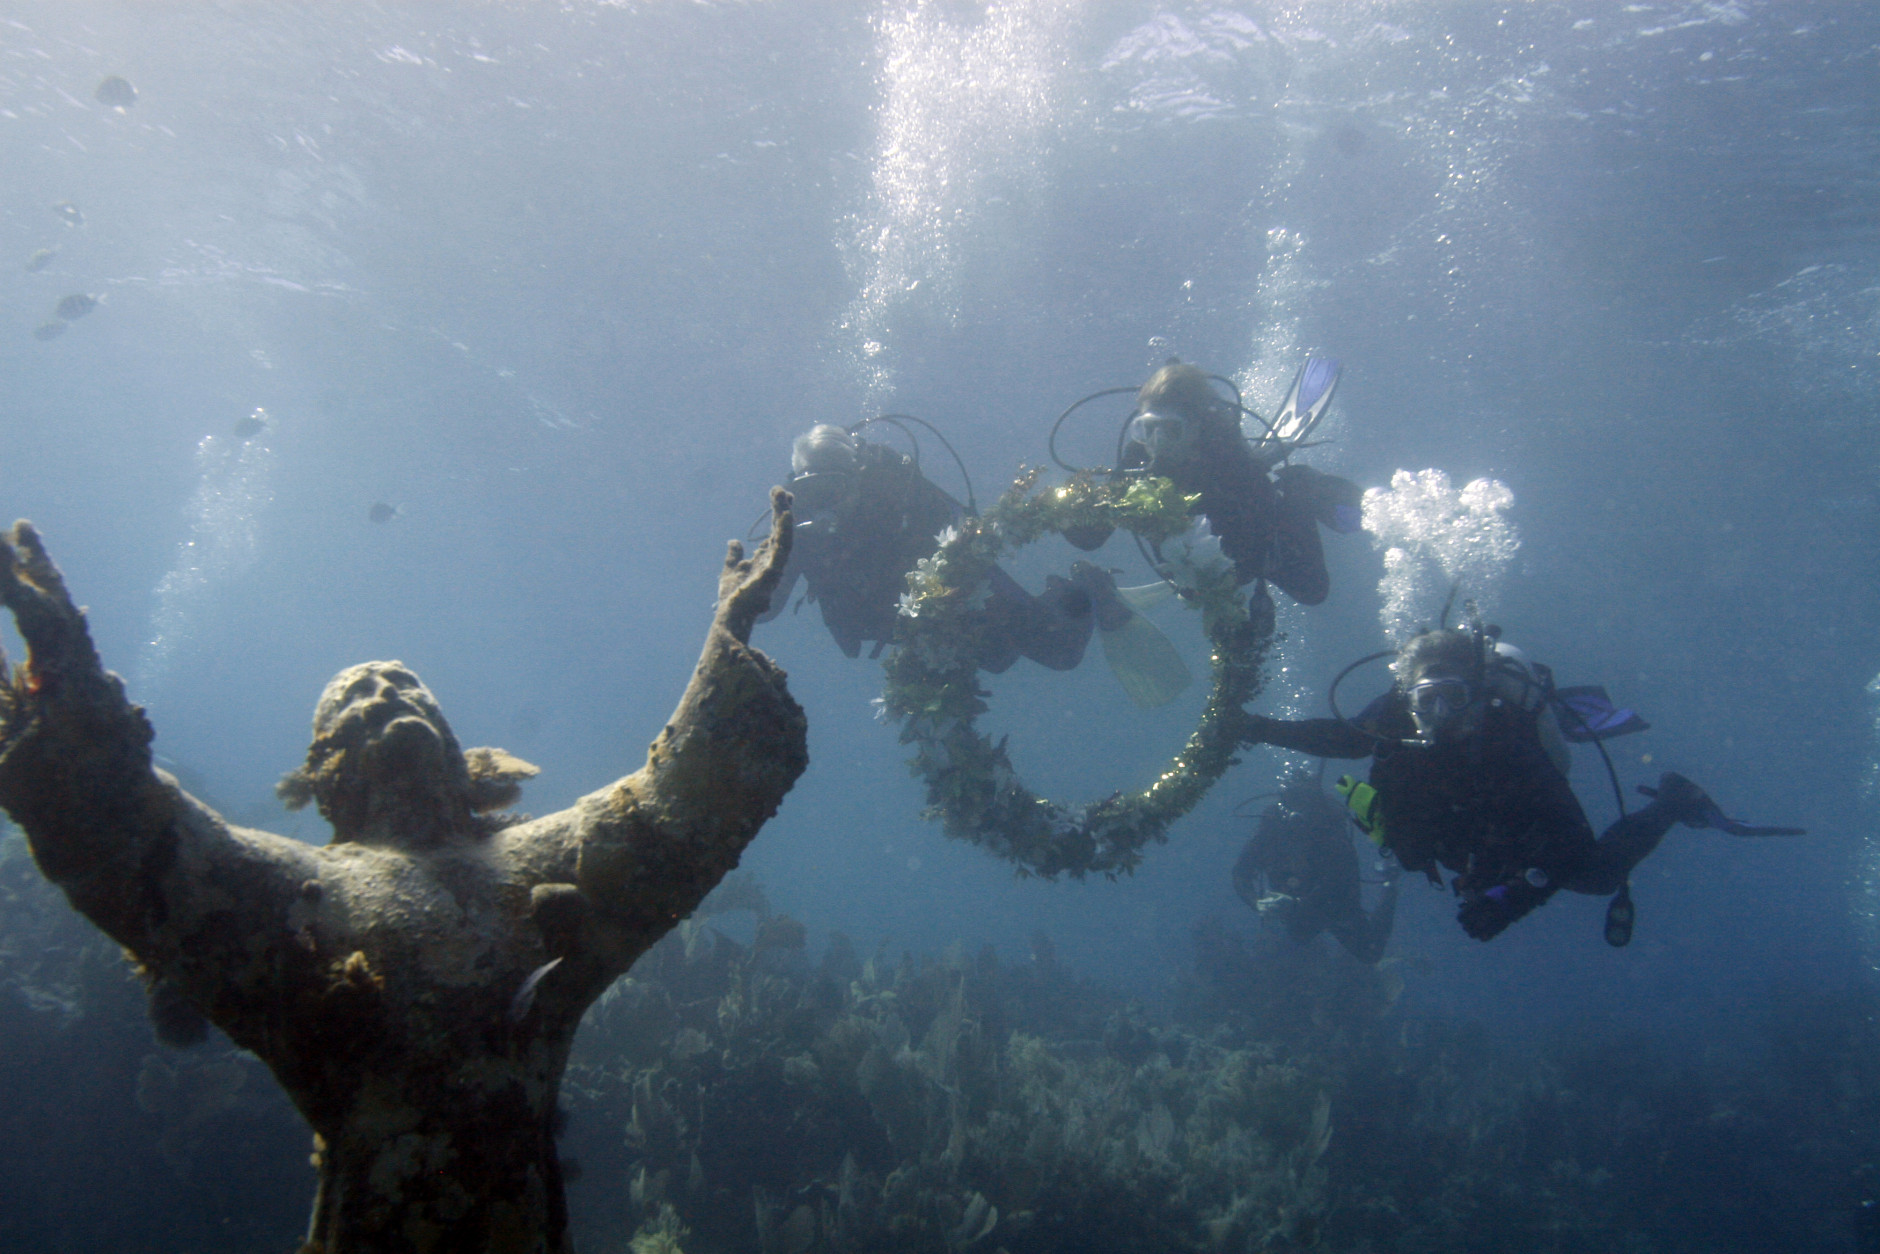 Divers Billy Causey, left, Southeast director of NOAA's national marine sanctuaries, noted oceanographer Dr. Sylvia Earle, center, and Pat Wells, John Pennekamp Coral Reef State Park manager, approach the Christ of the Abyss statue with a commemorative garland during a ceremony, Friday, Dec. 10, 2010 to commemorate the 50th anniversary celebration for the park off Key Largo, Fla., in the Florida Keys National Marine Sanctuary. (AP Photo/Wilfredo Lee)